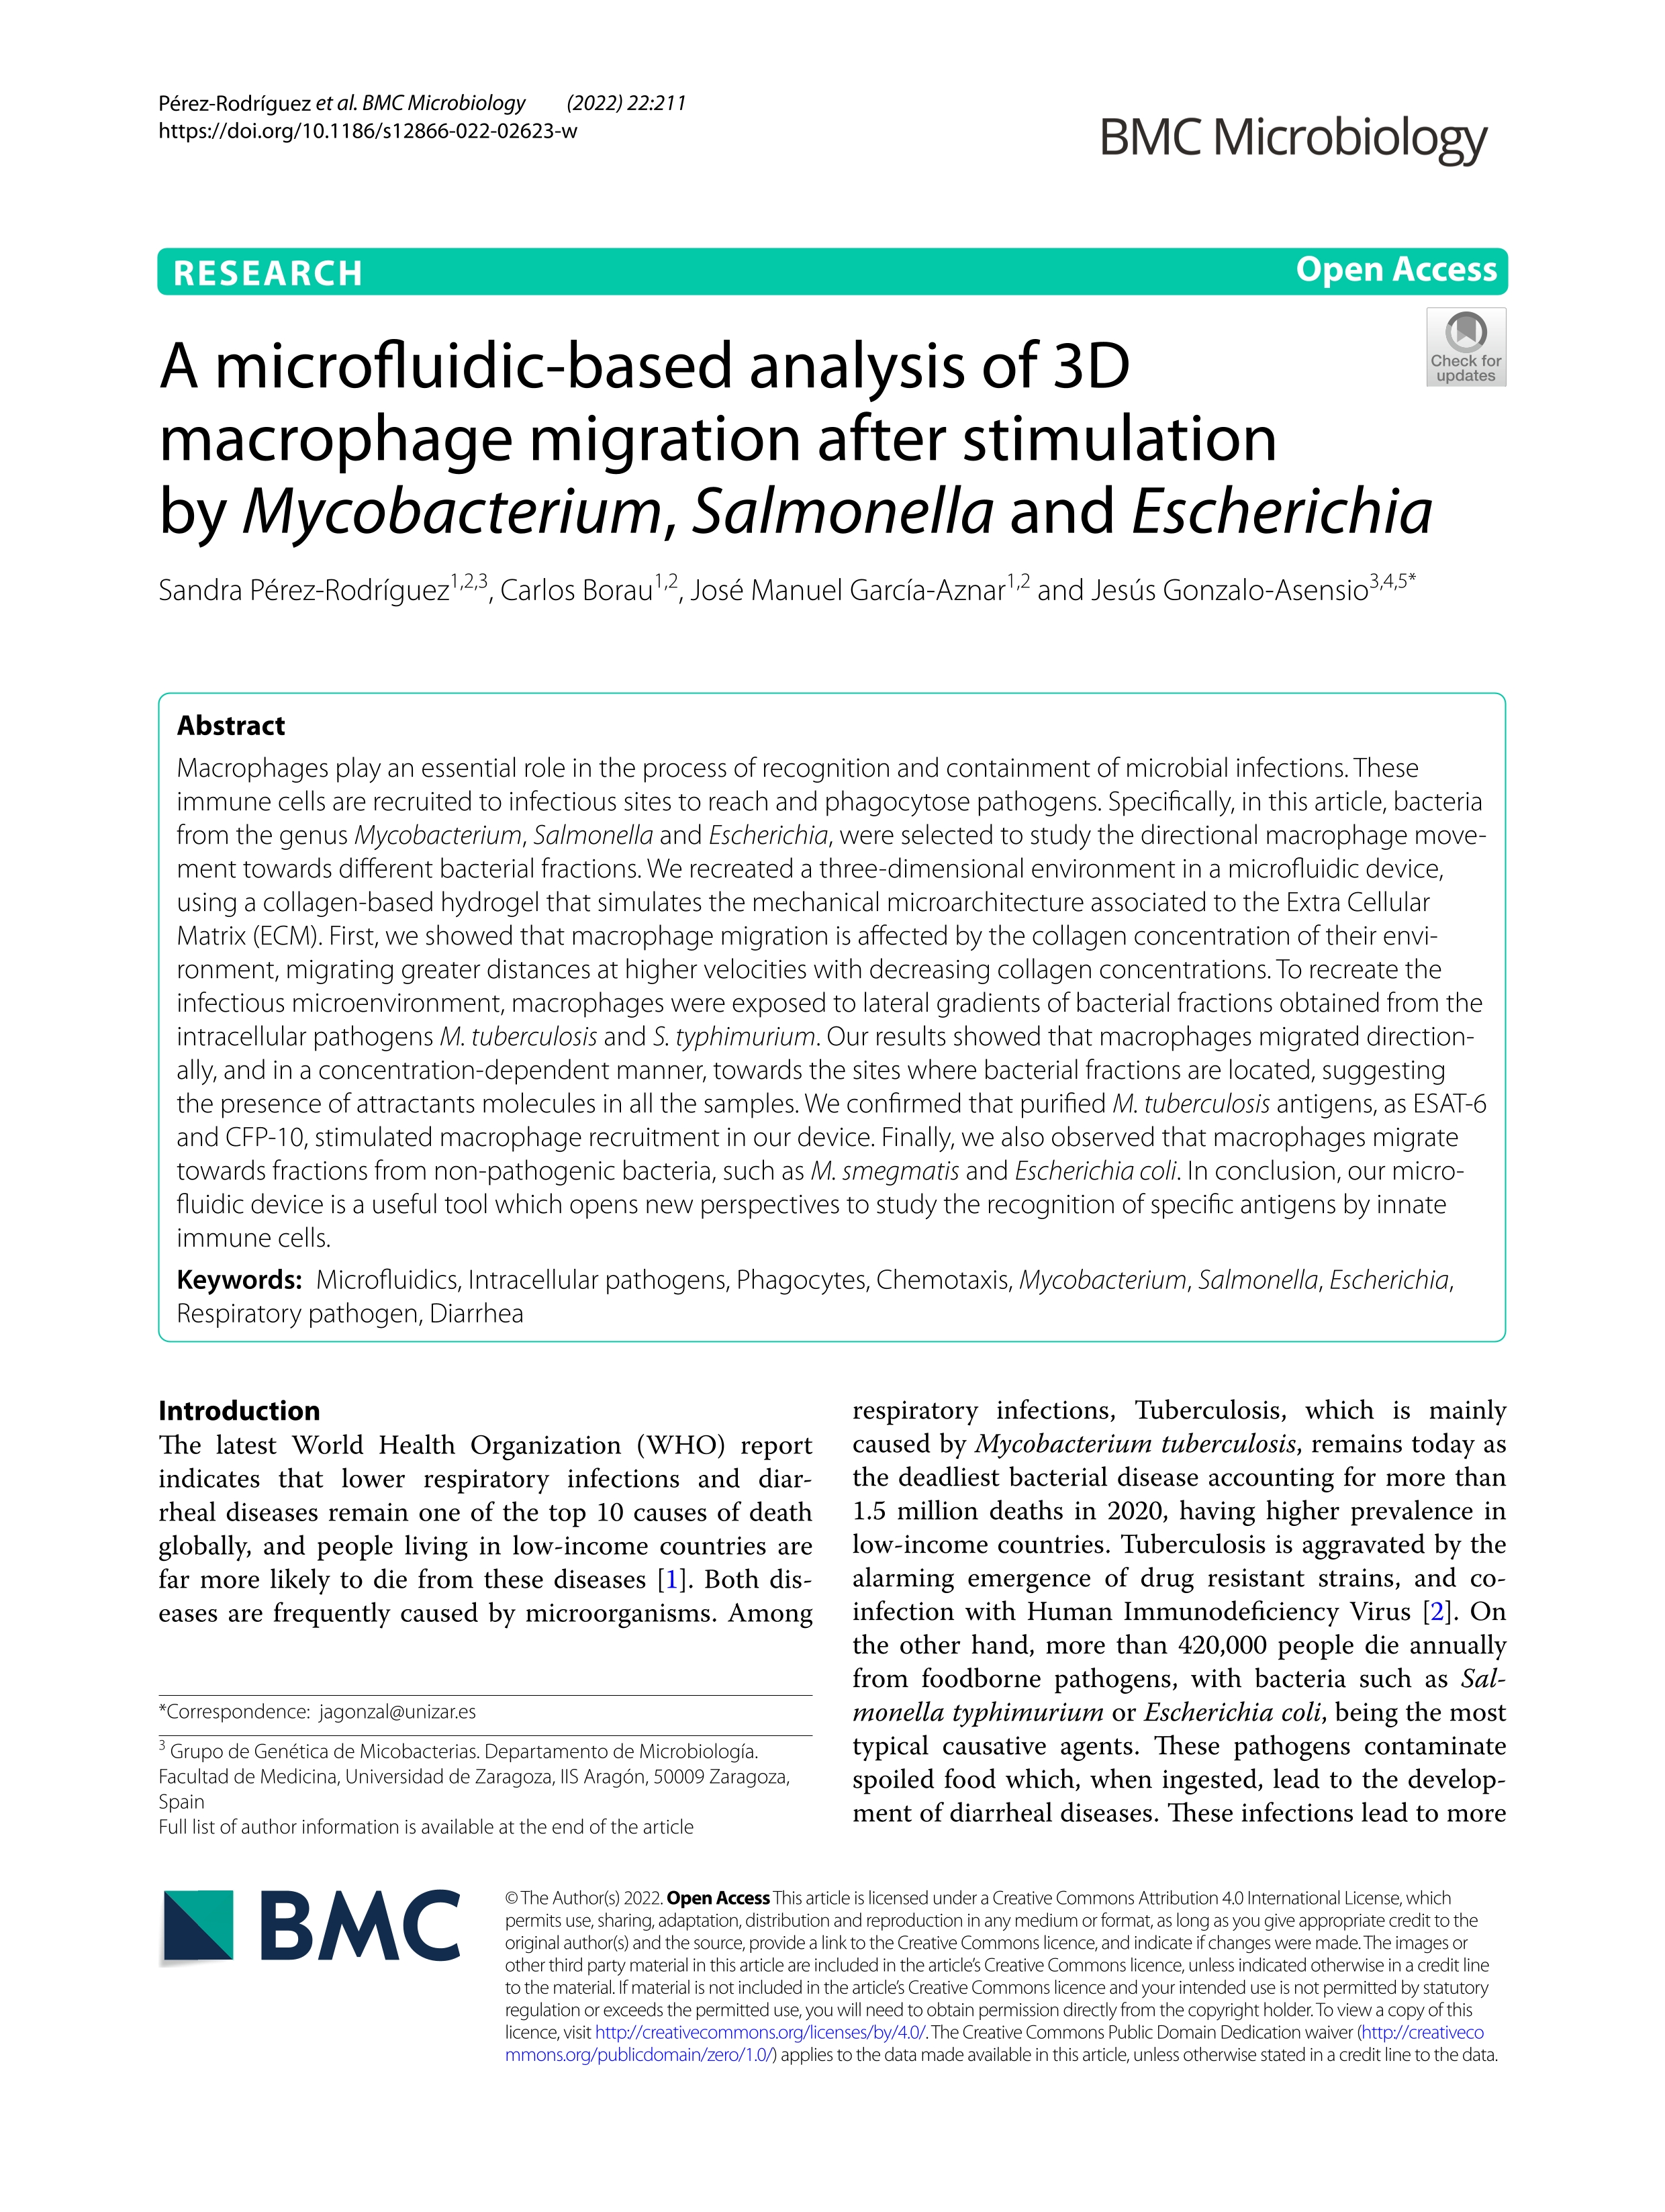 A microfluidic-based analysis of 3D macrophage migration after stimulation by Mycobacterium, Salmonella and Escherichia